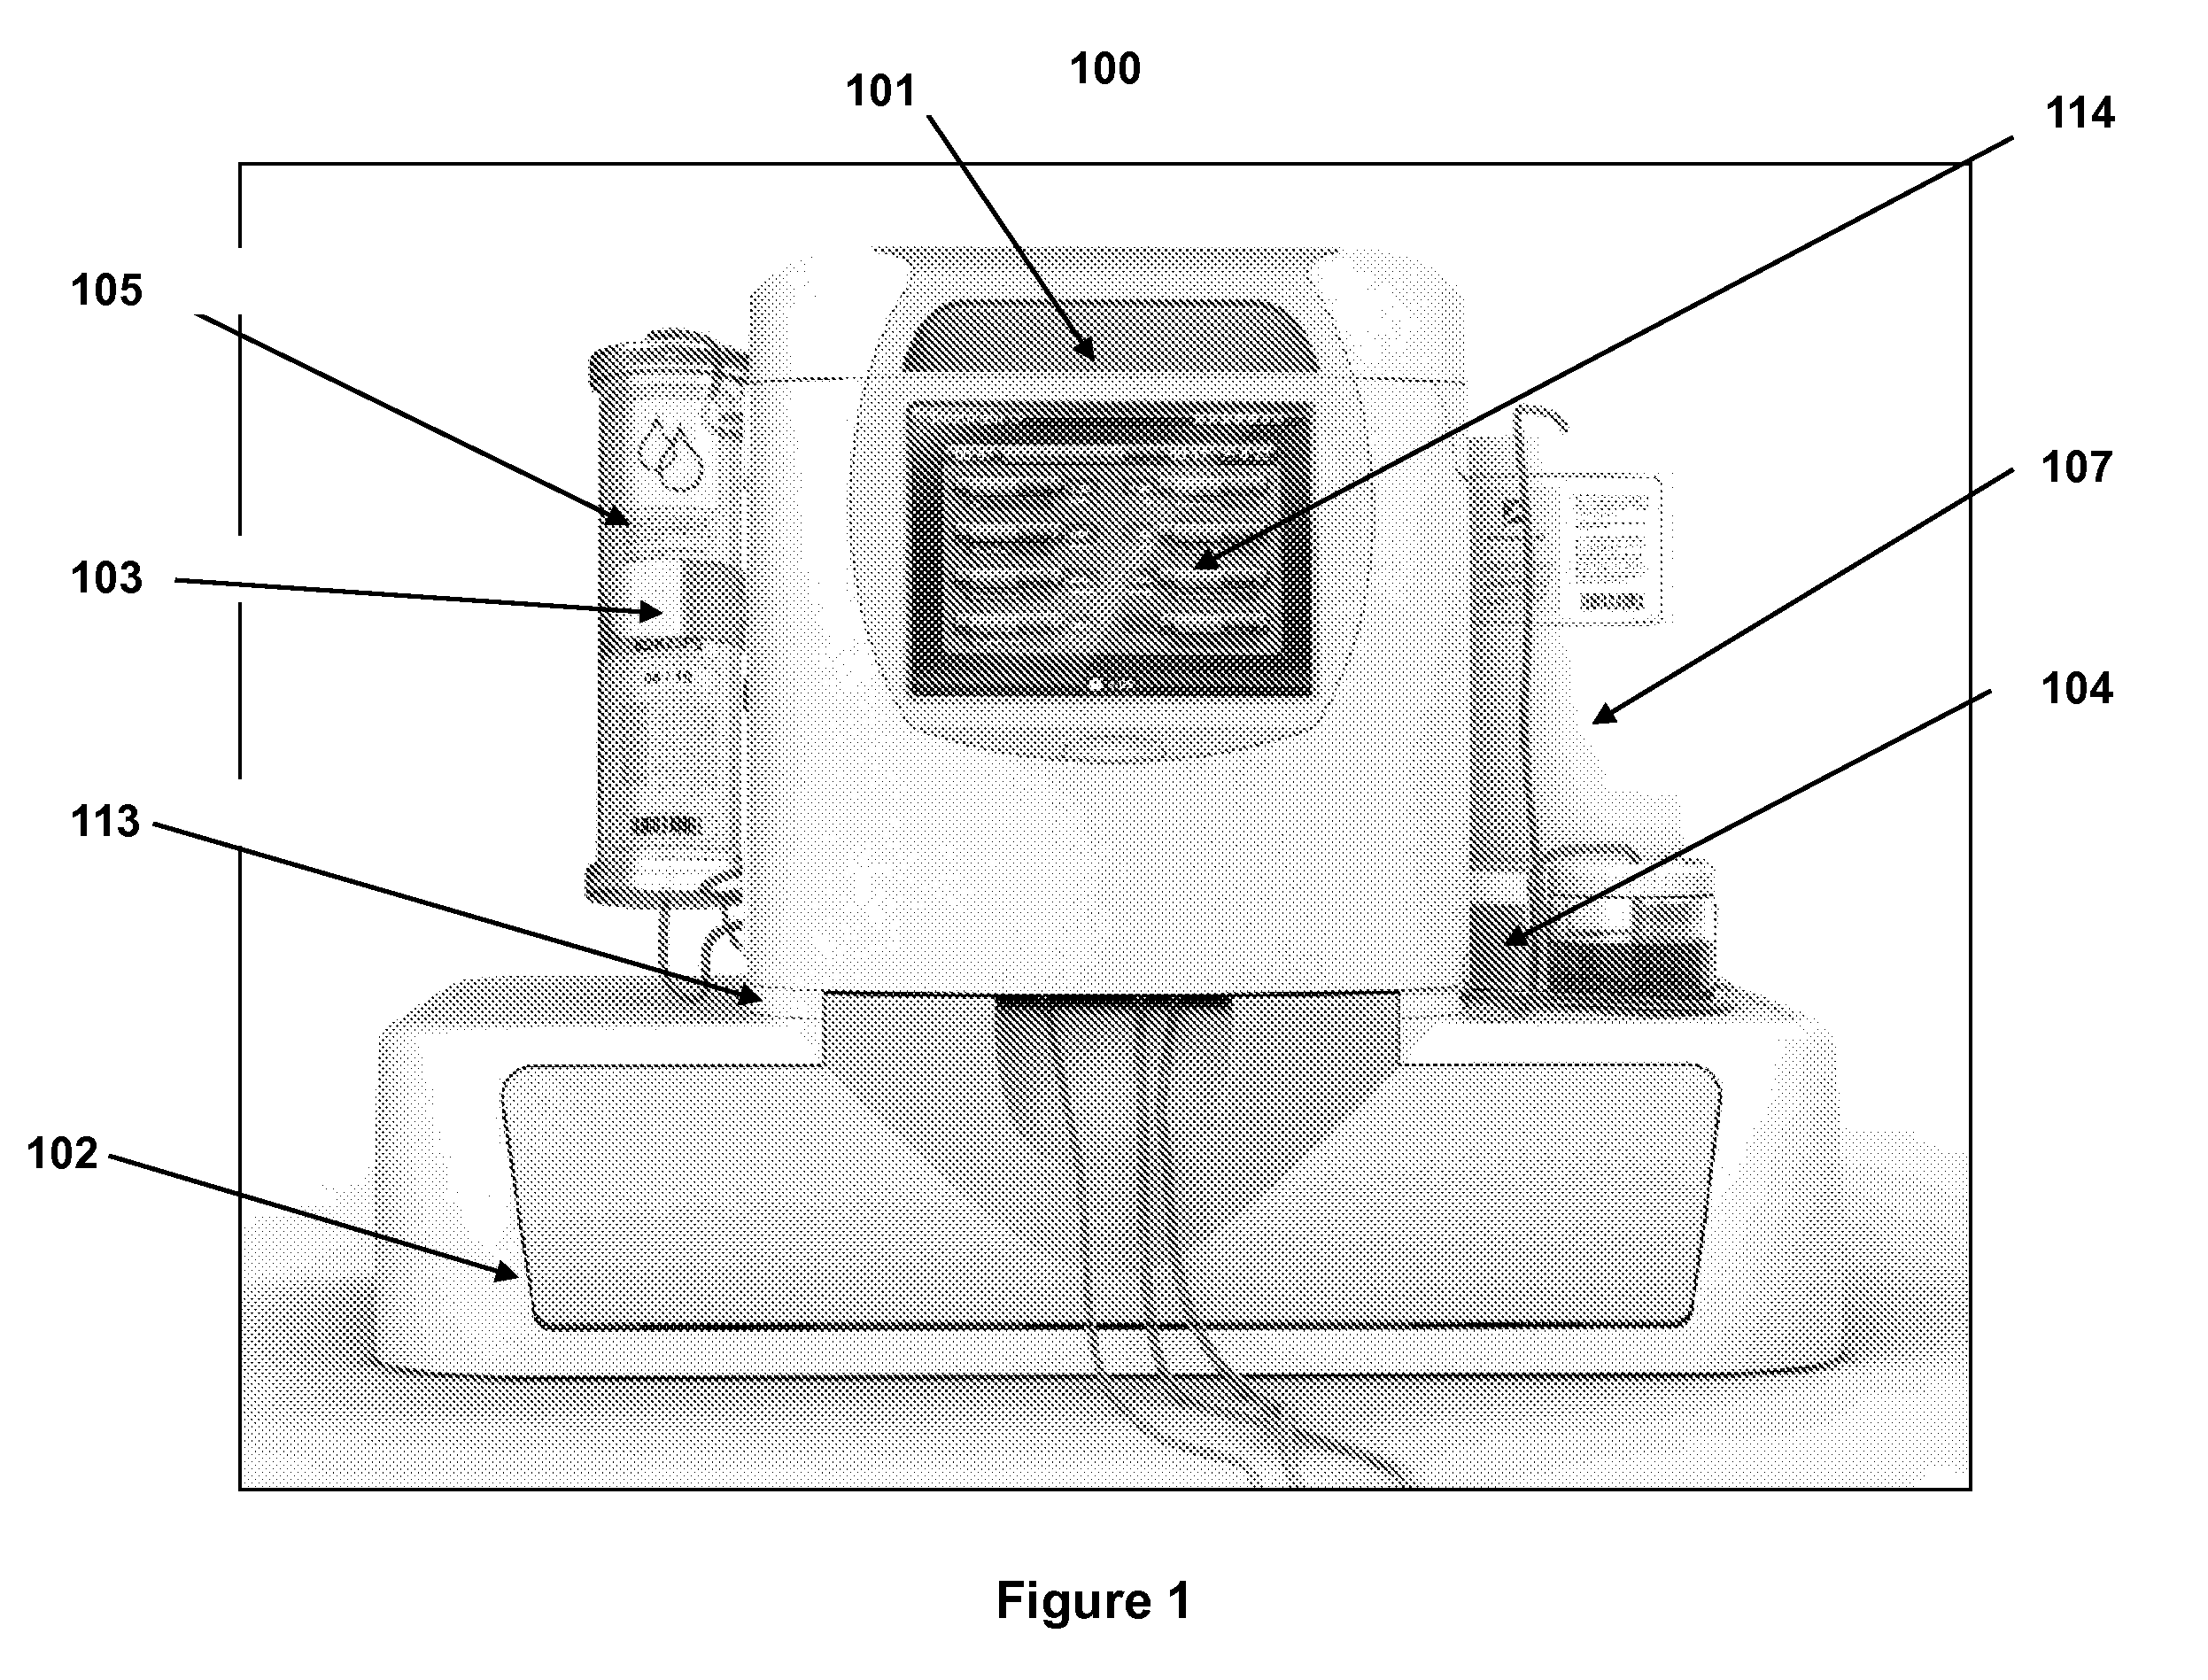 Methods and Systems for Measuring and Verifying Additives for Use in a Dialysis Machine